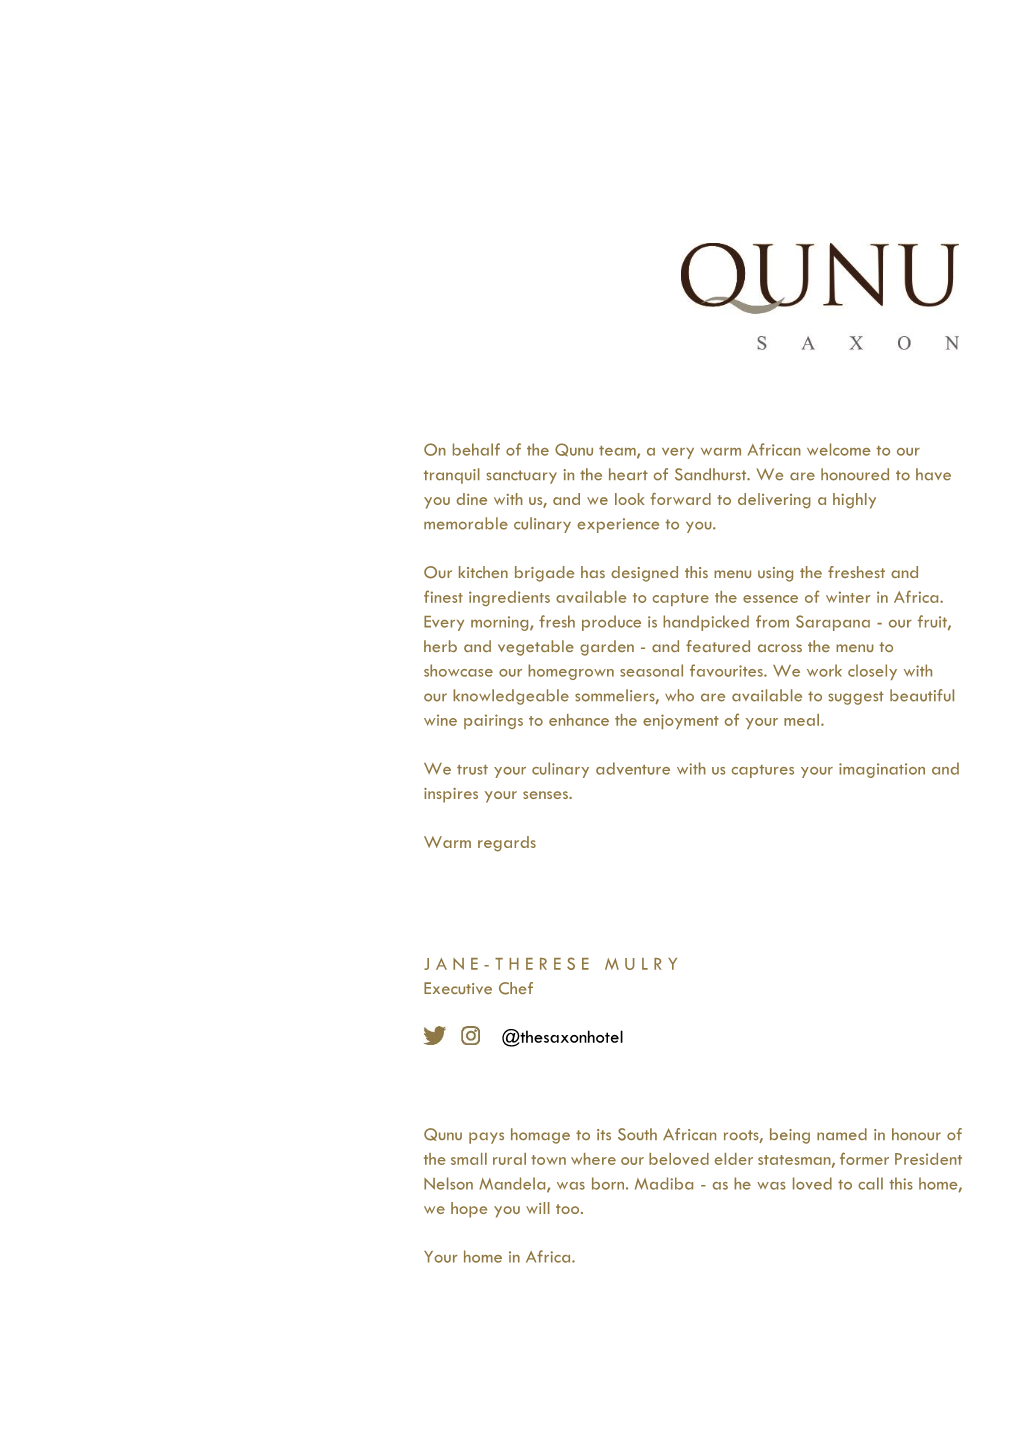 On Behalf of the Qunu Team, a Very Warm African Welcome to Our Tranquil Sanctuary in the Heart of Sandhurst